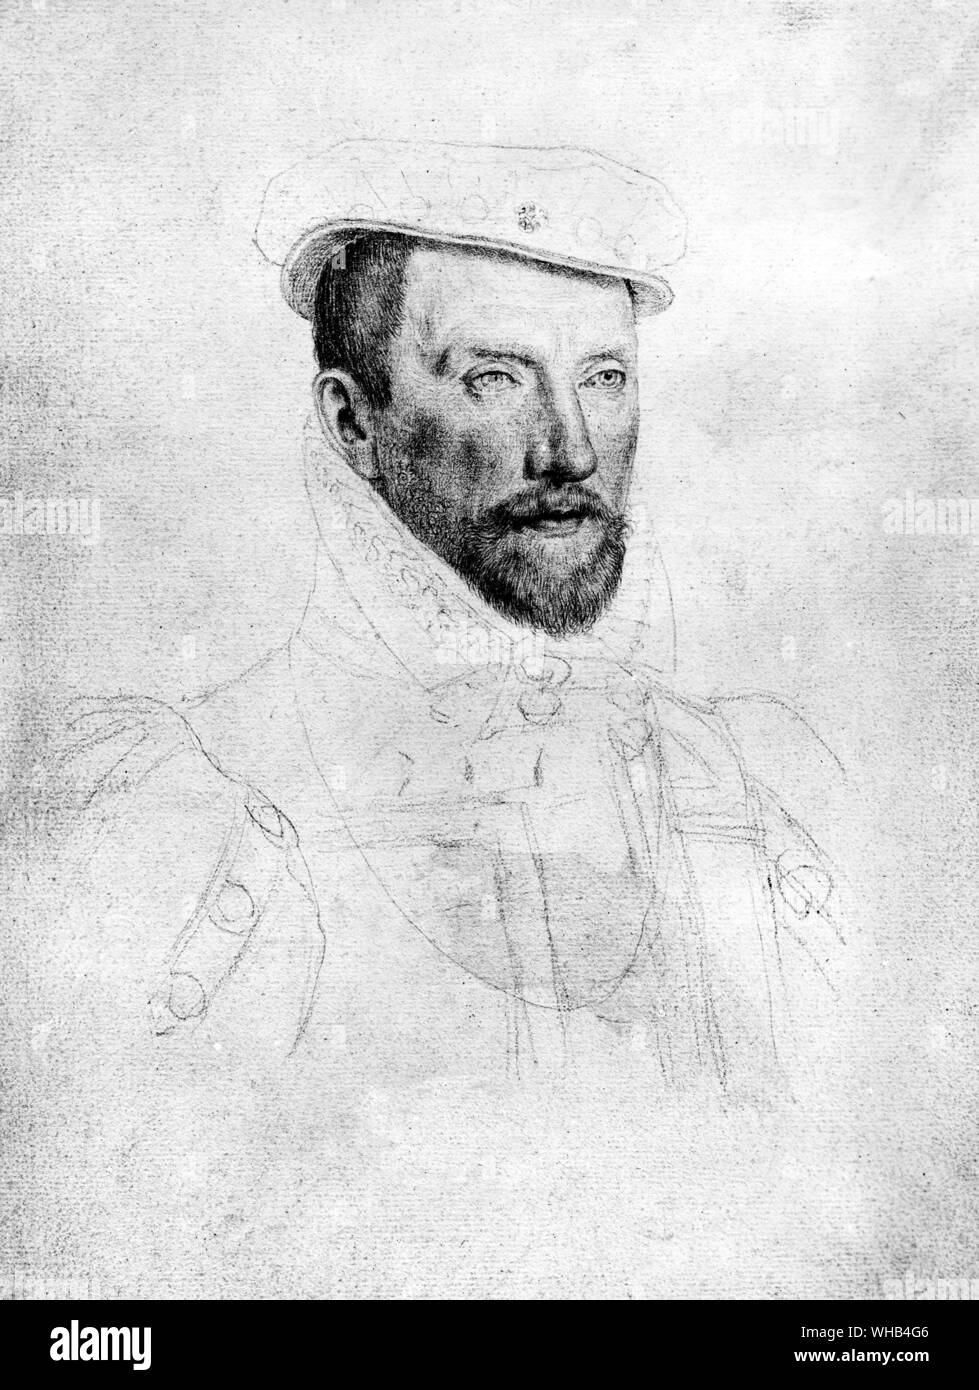 Gaspard de Coligny Admiral of France and leader of the Protestants. Engraving by F Clouet 1572 Stock Photo